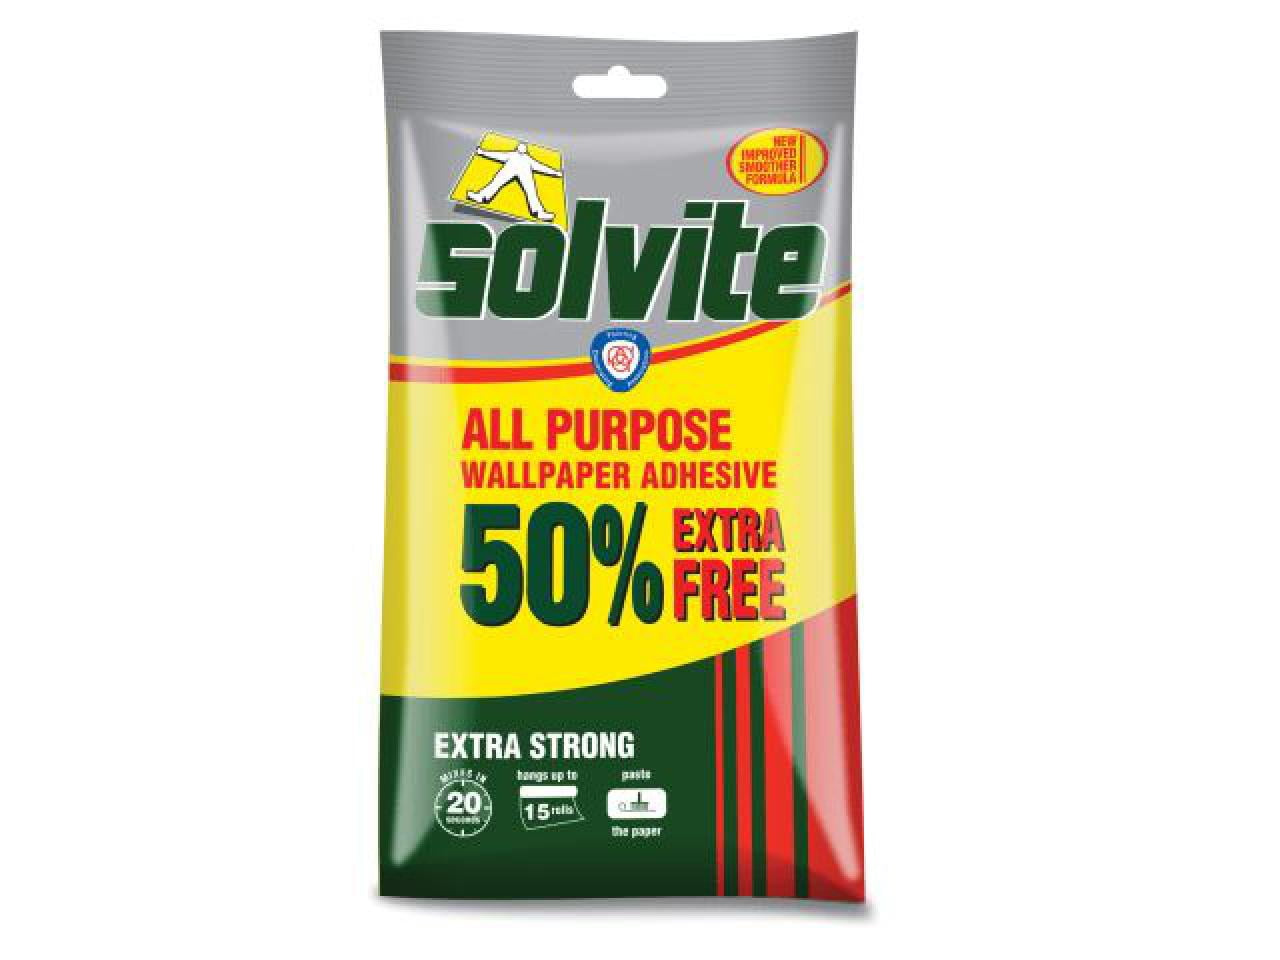 SOLVITE Paste The Wall Wallpaper Paste - 50% EXTRA FREE hang up to 30 Rolls